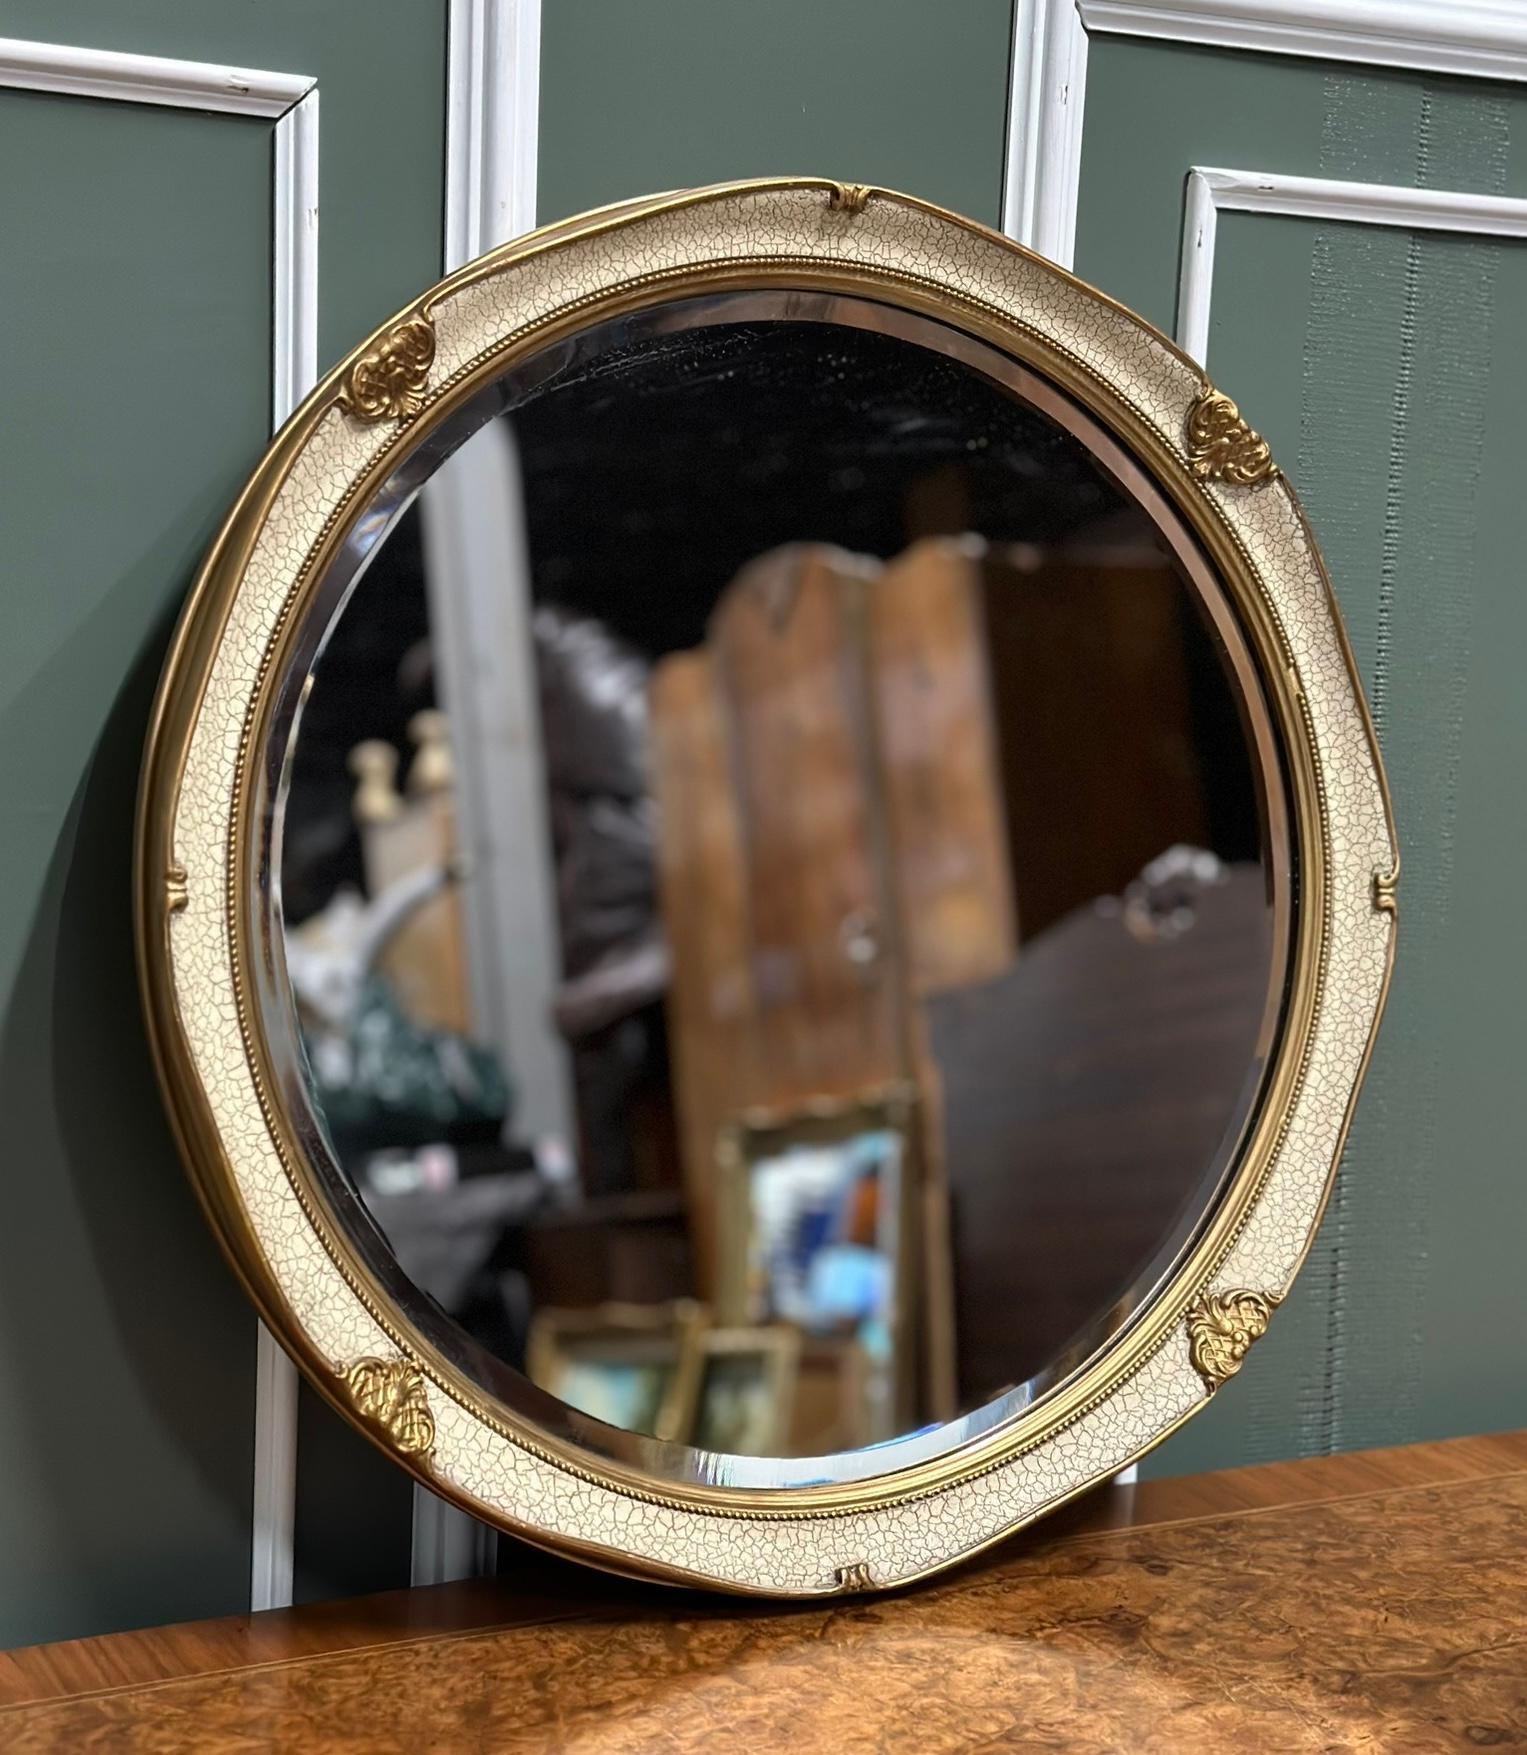 We are excited to present this lovely hand-painted white round wall mirror with gilt detail.

Very decorative piece with lovely gilt painted details.
It has an excellent metal chain on its back to make it easy to hang anywhere you'd like.

We